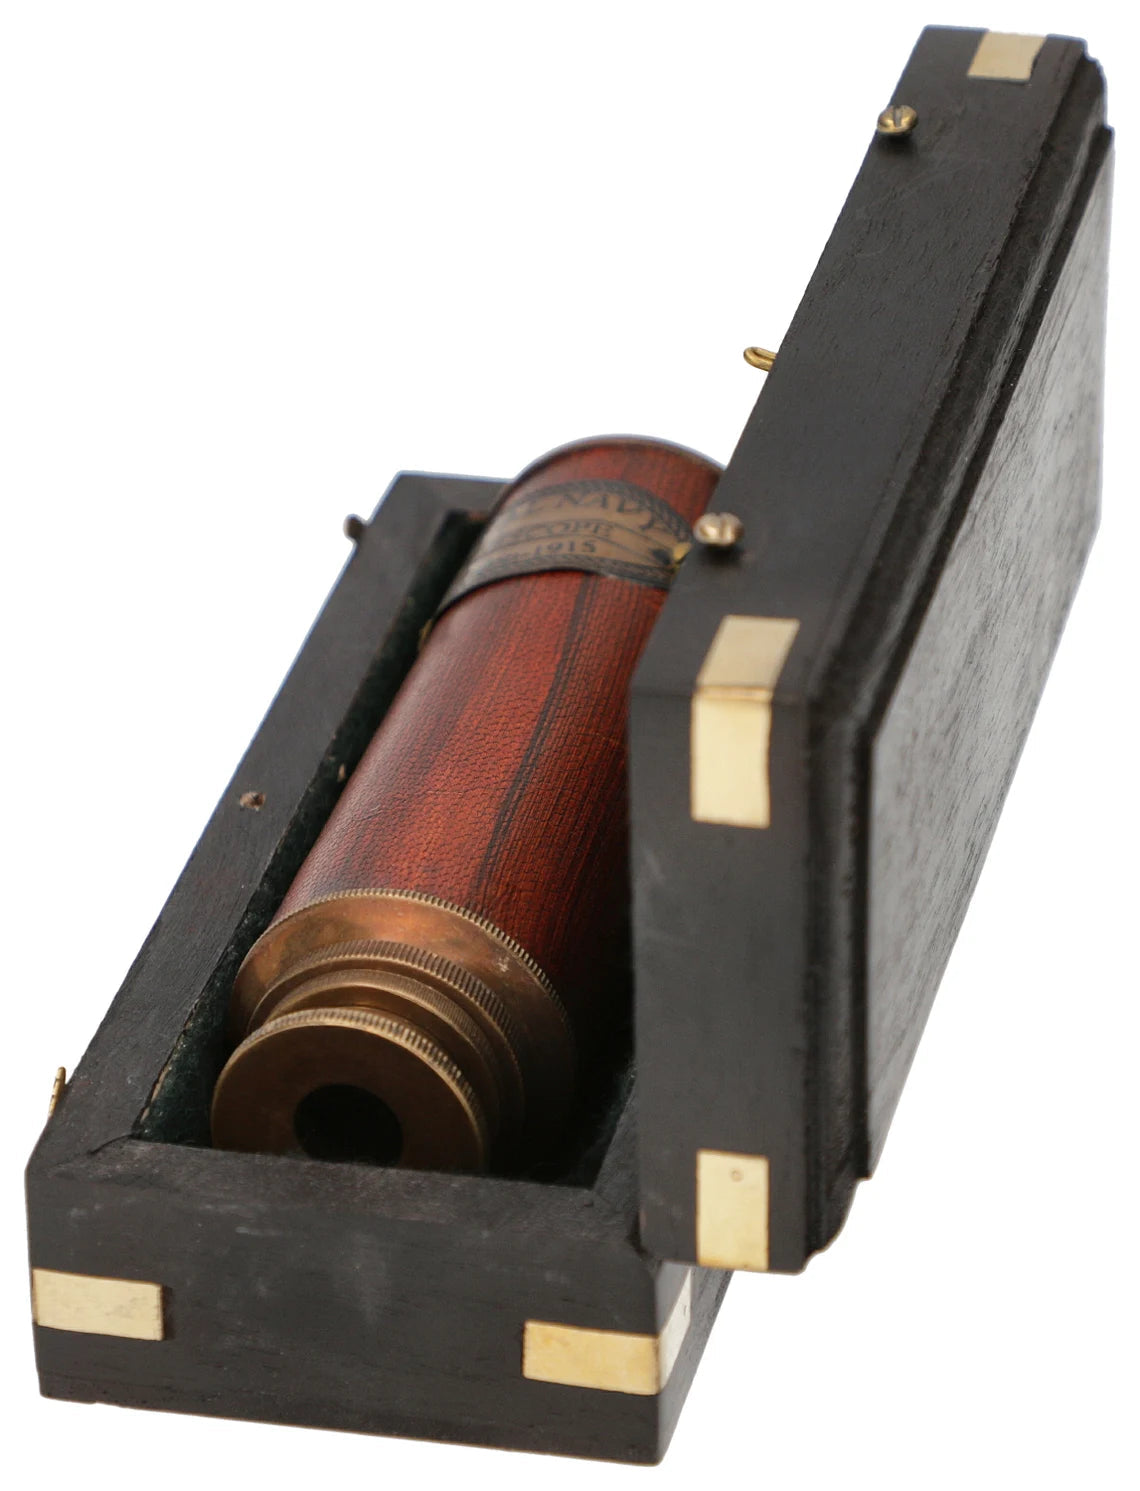 Antique Royal navy LONDON 1915 Model Brass Telescope with Wooden Box Vintage Maritime Collapsing Spyglass